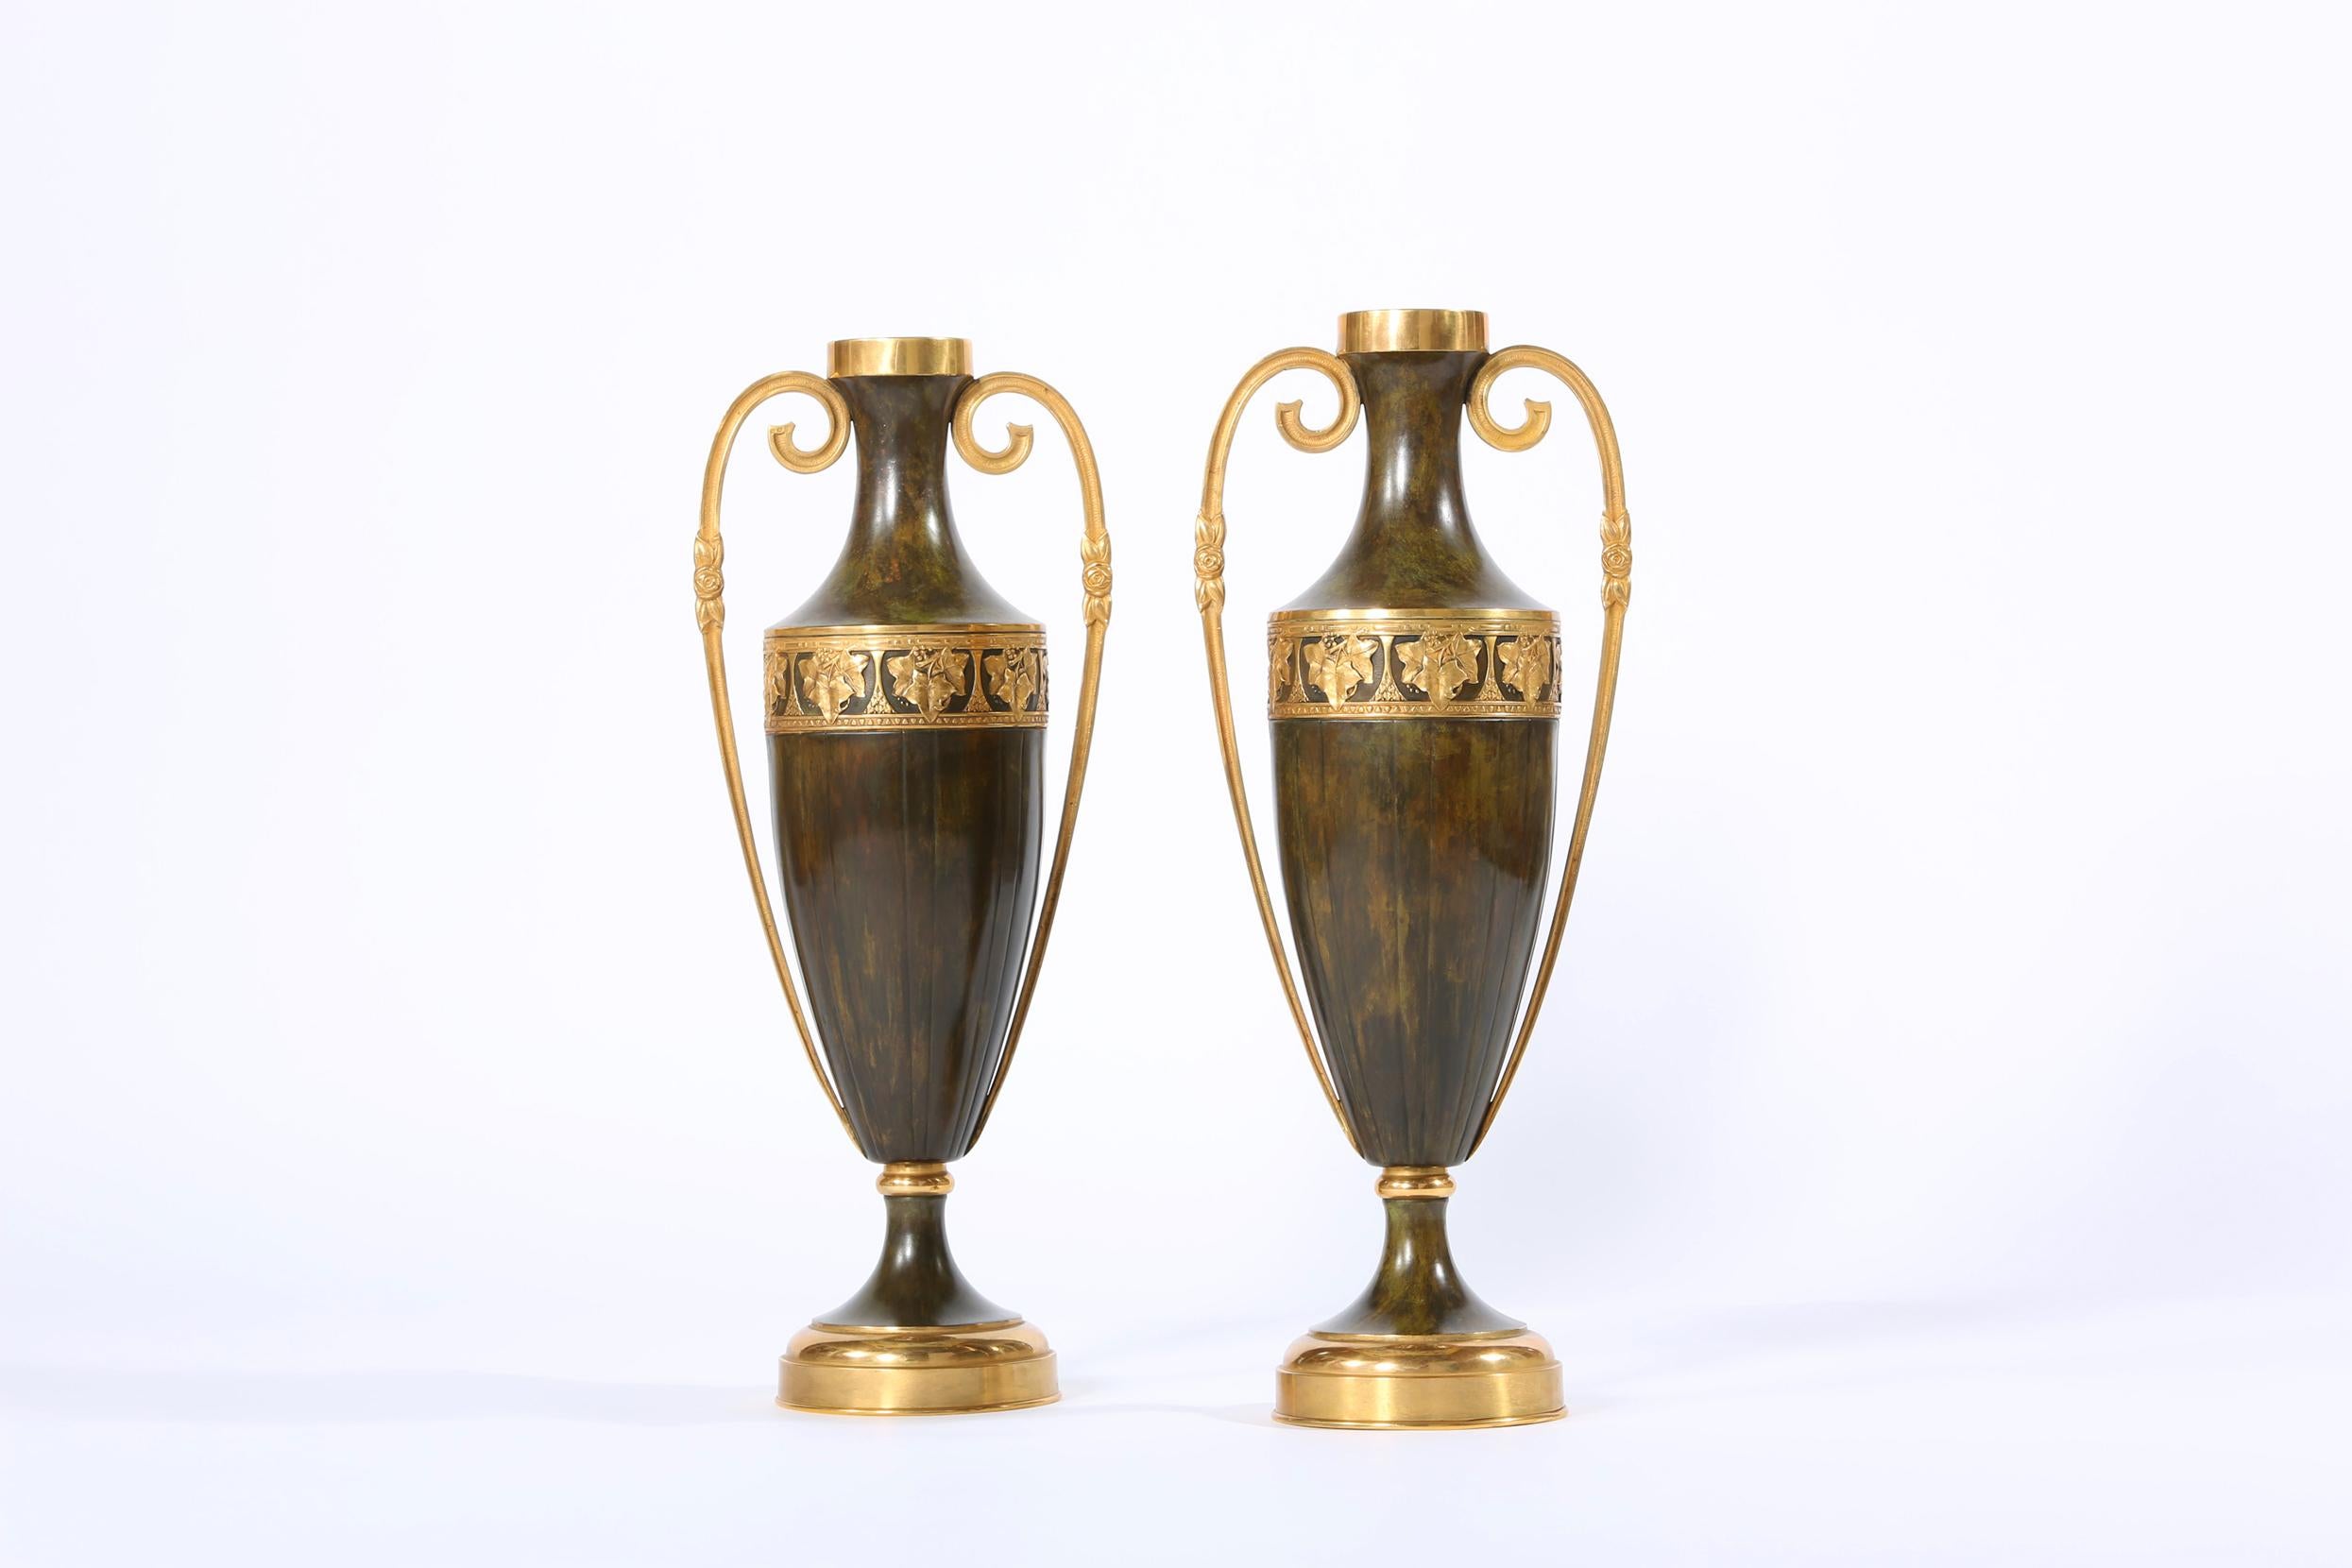 Early 20th century pair of tall decorative patinated bronze vases / pieces with exterior design details and gilded side handles. Each vase is in great vintage condition. Minor wear consistent with age / use. Each piece stand about 22.5 inches tall x